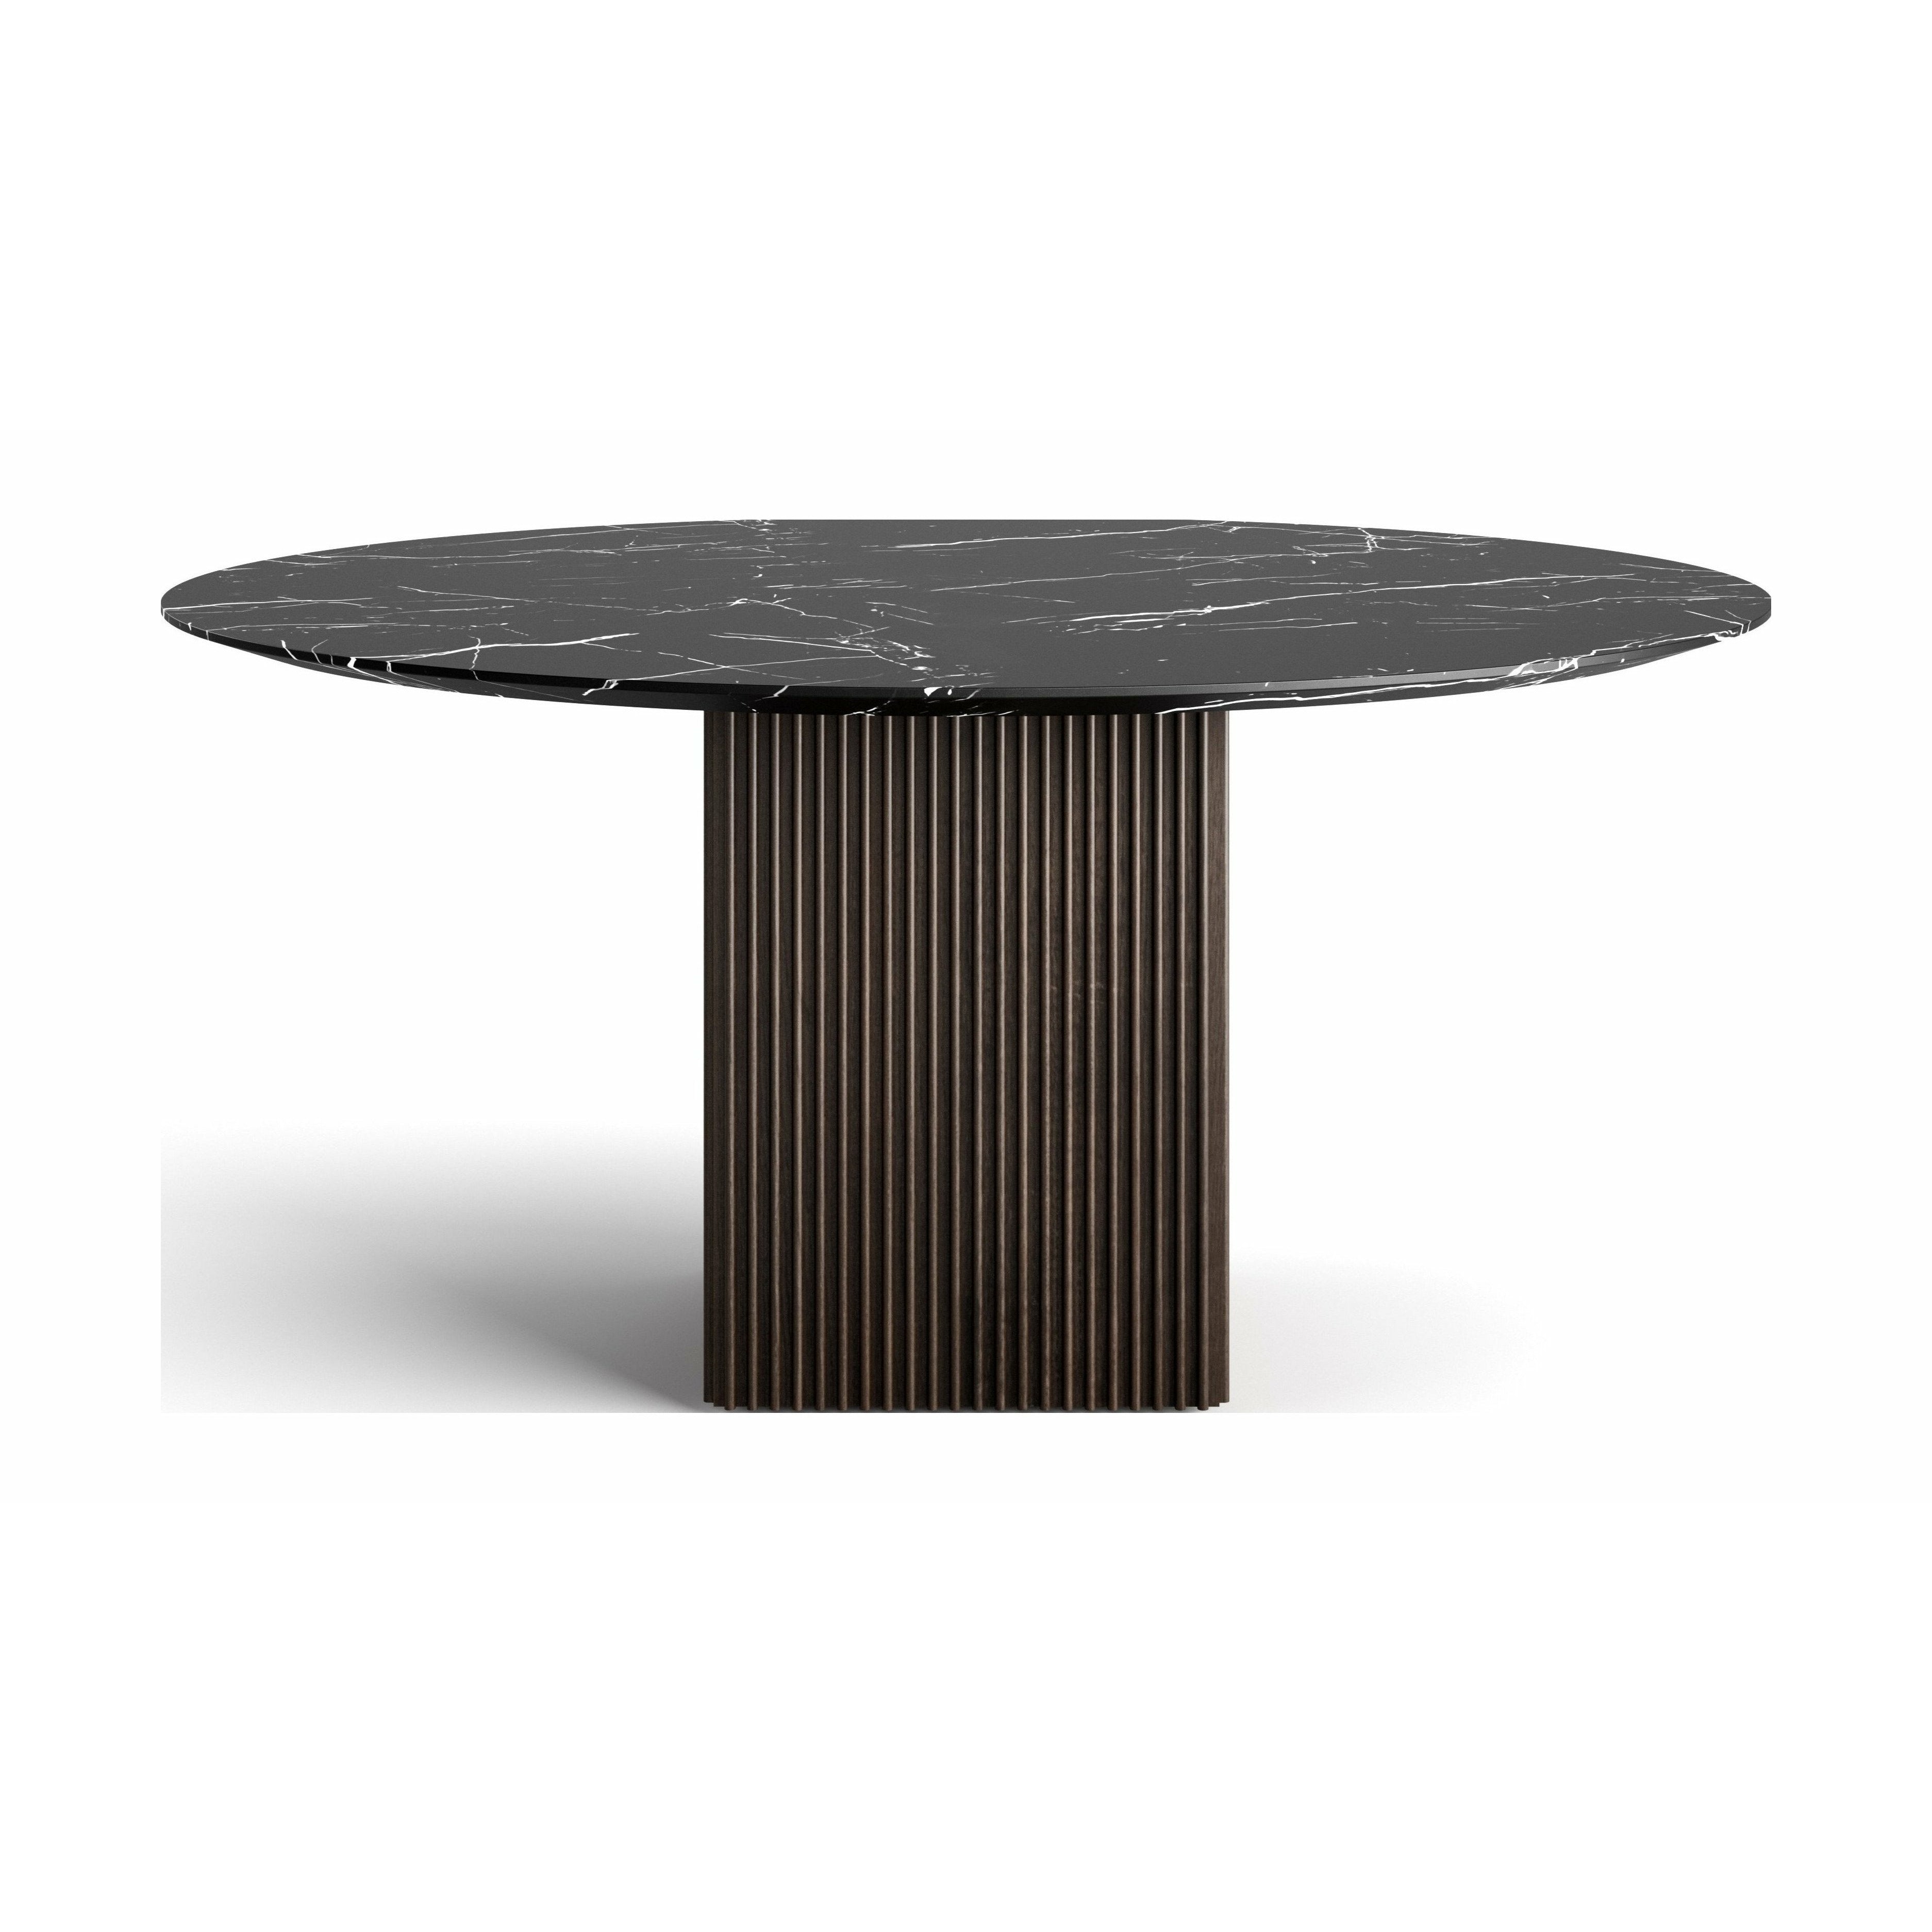 Dk3 Ten Round Dining Table Marble Marquina/Smoked Oak, ø150 Cm